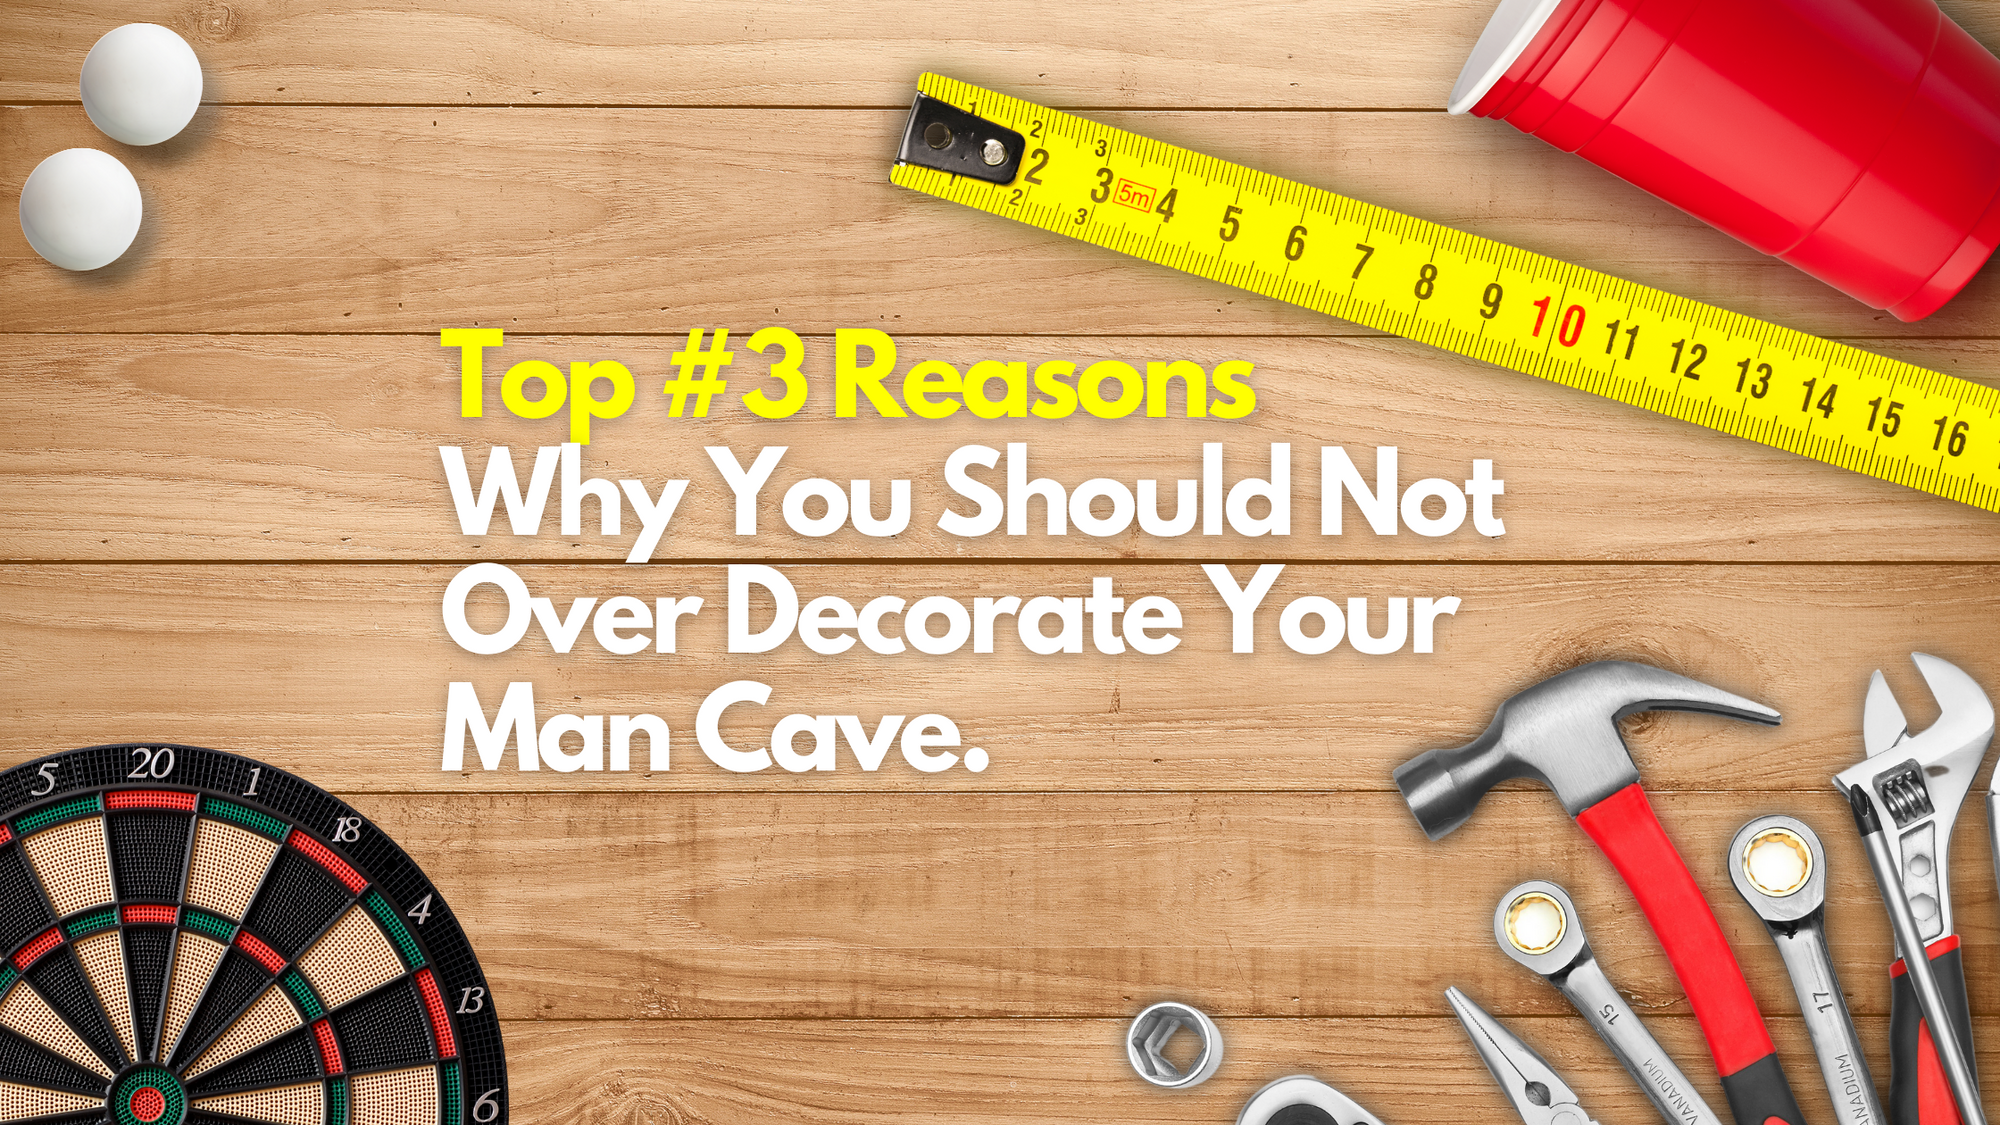 Top #3 Reasons Why You Should Not Over Decorate Your Man Cave